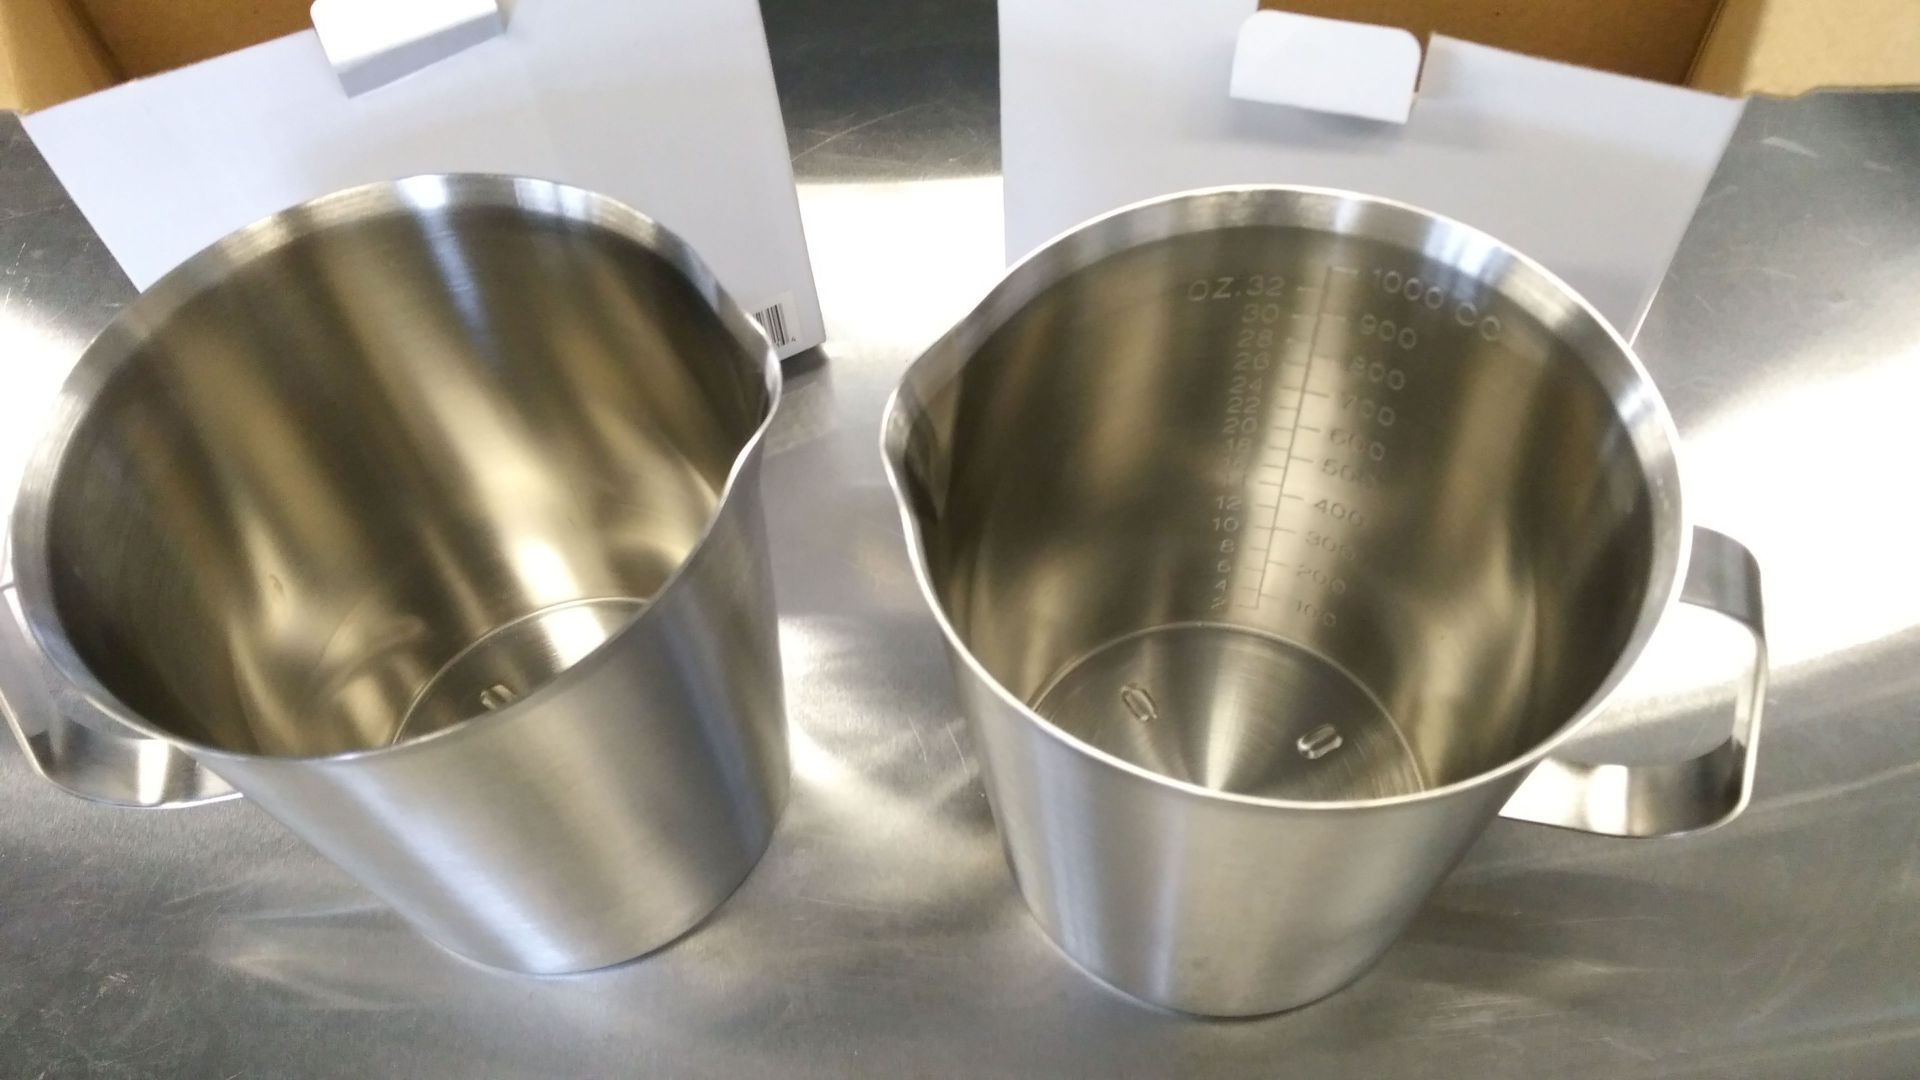 1000ml Heavy Duty Stainless Measures - Lot of 2